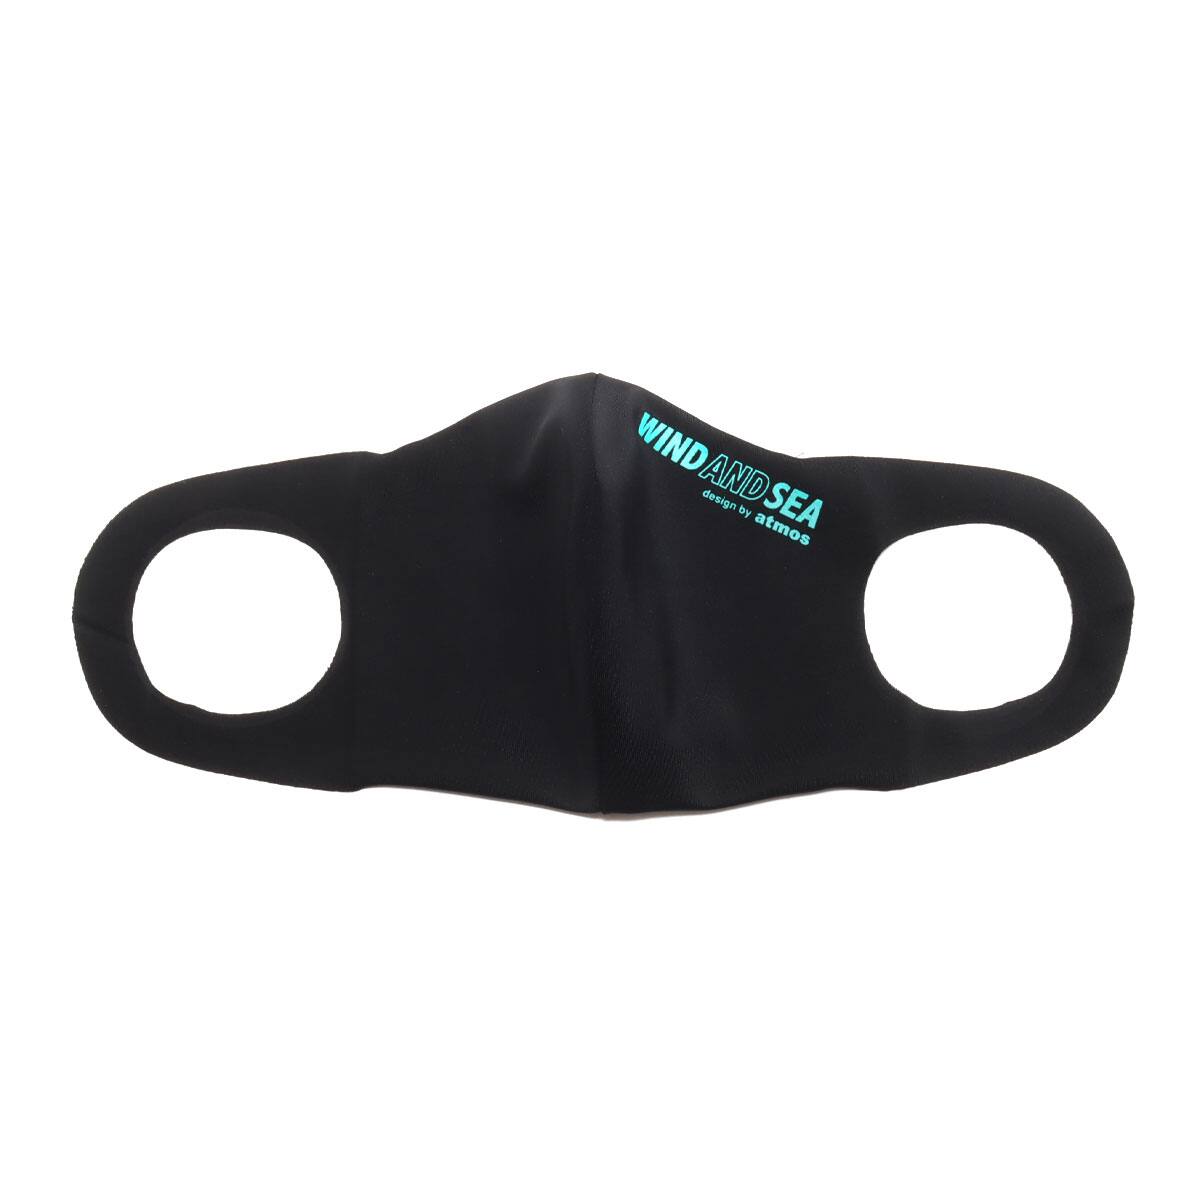 Atmos x Wind and Sea Facemask